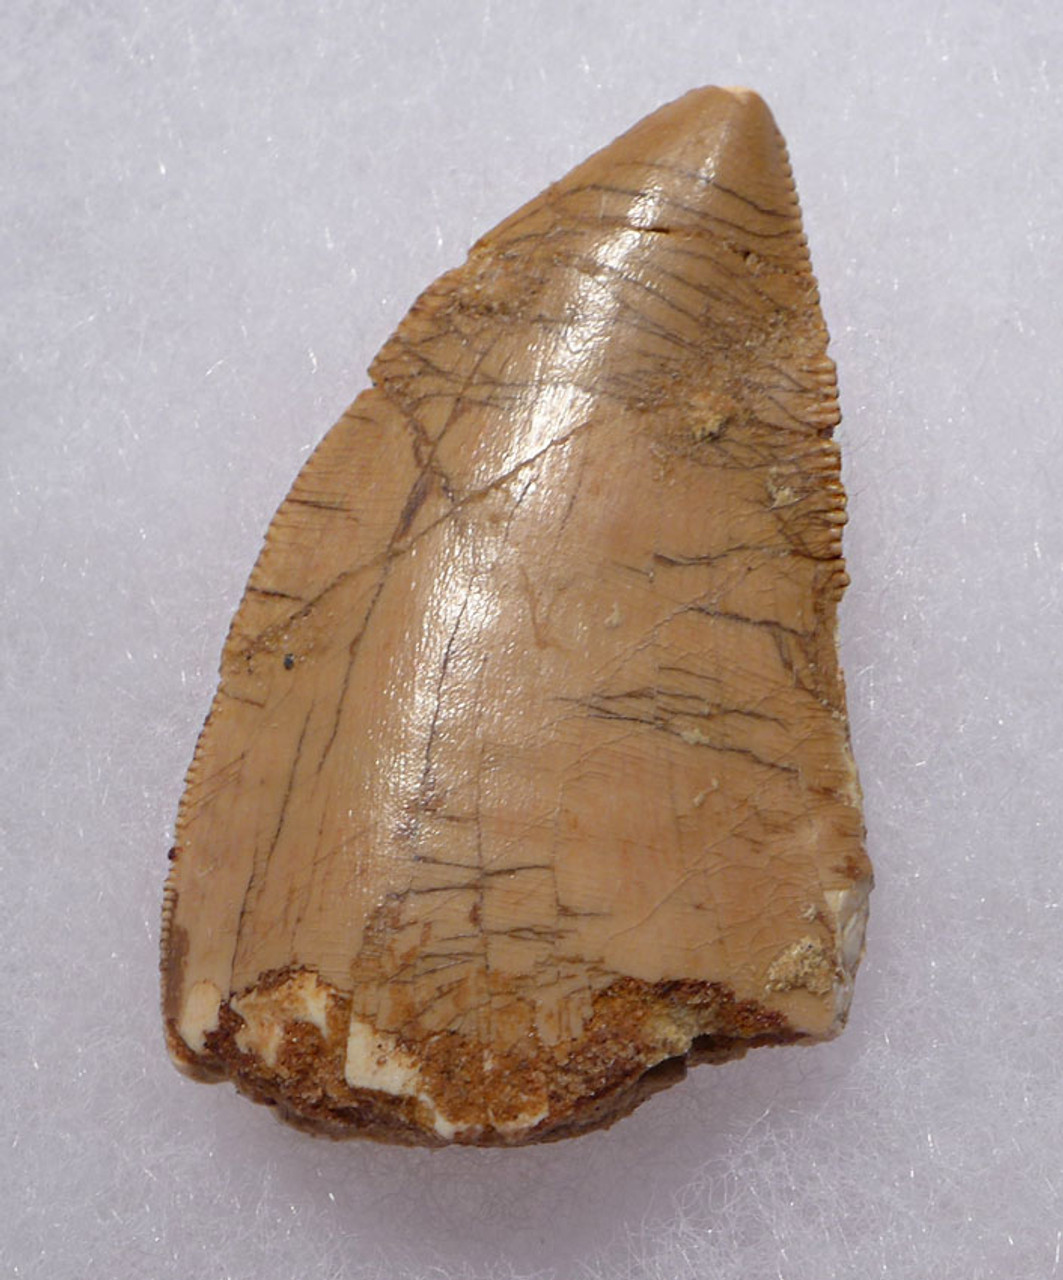 DT2-091 - CARCHARODONTOSAURUS FOSSIL TOOTH FROM THE LARGEST MEAT-EATING DINOSAUR 